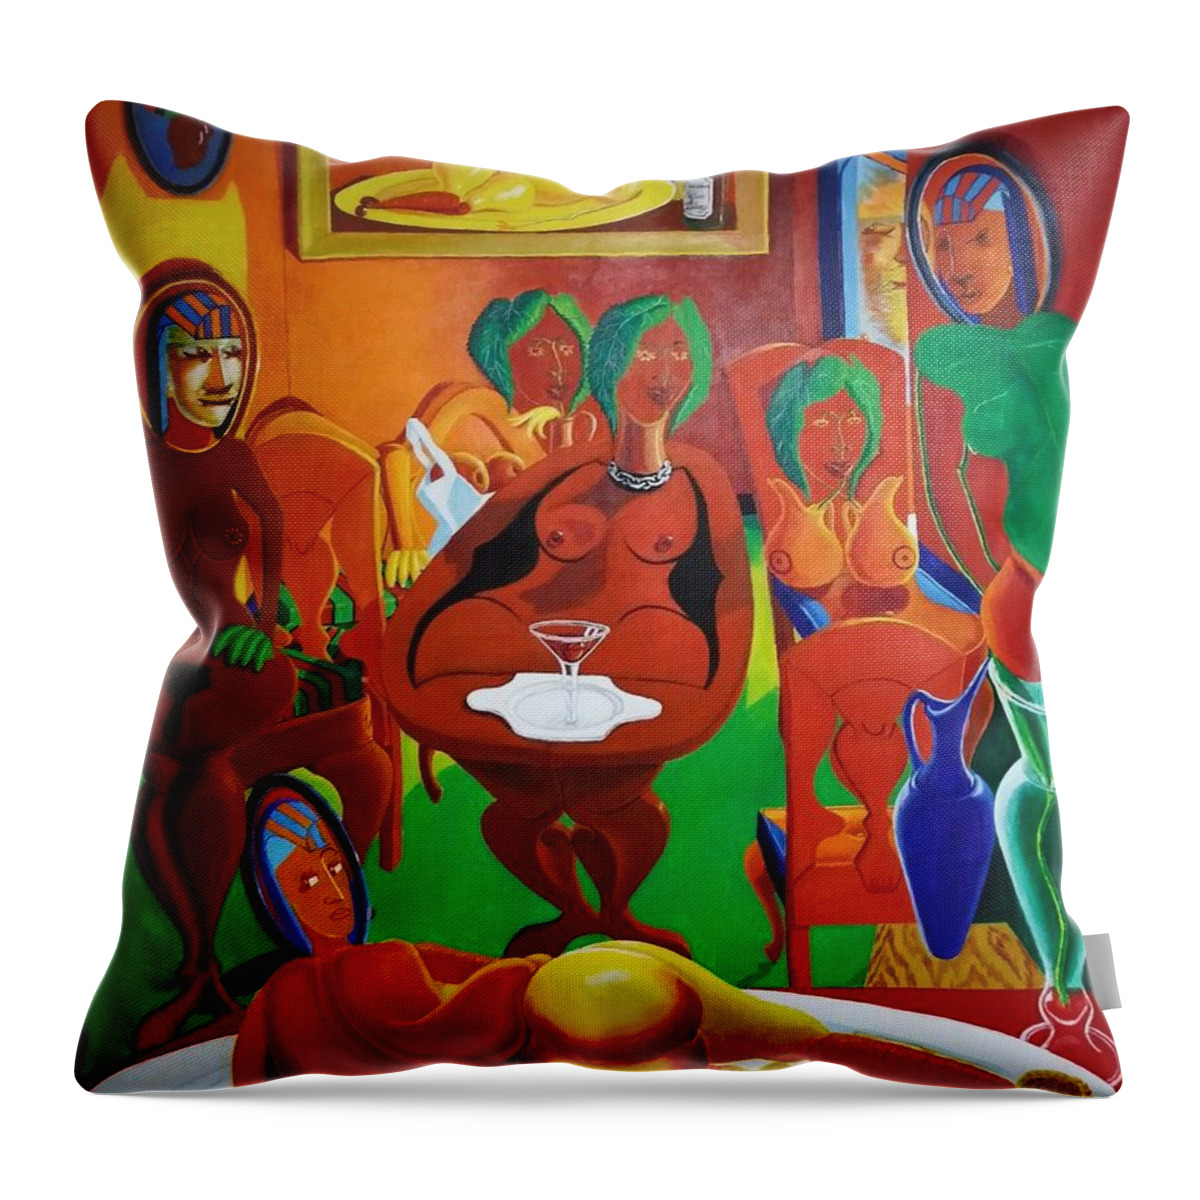  Throw Pillow featuring the painting Les Demoiselles De Moi Seul The Pimping Of Afrodite by David G Wilson